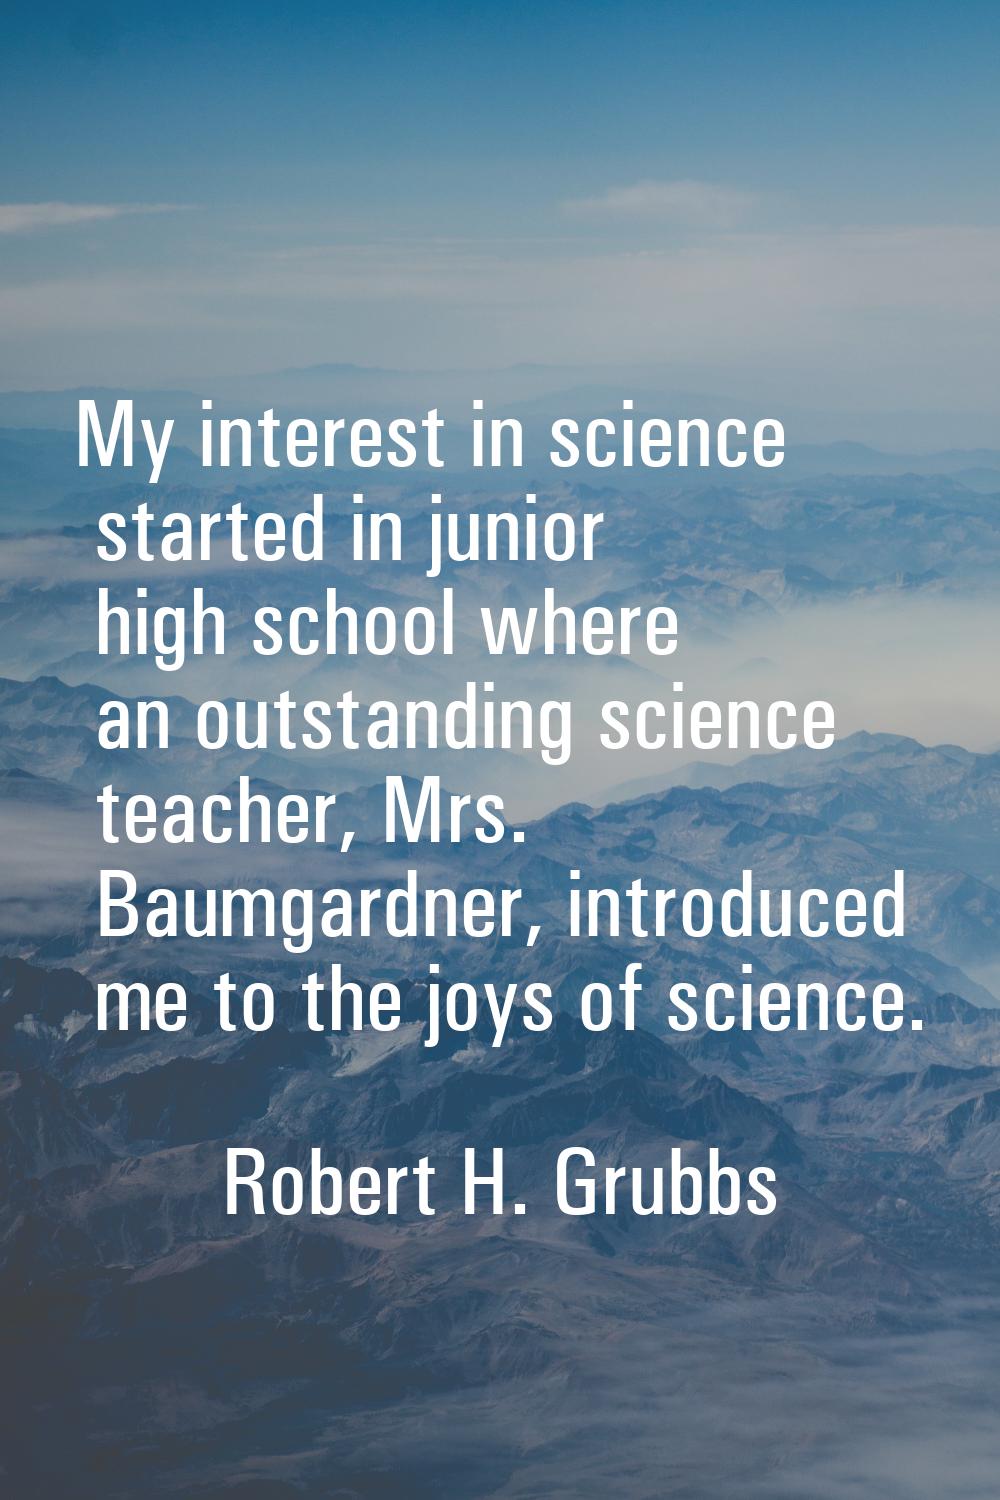 My interest in science started in junior high school where an outstanding science teacher, Mrs. Bau